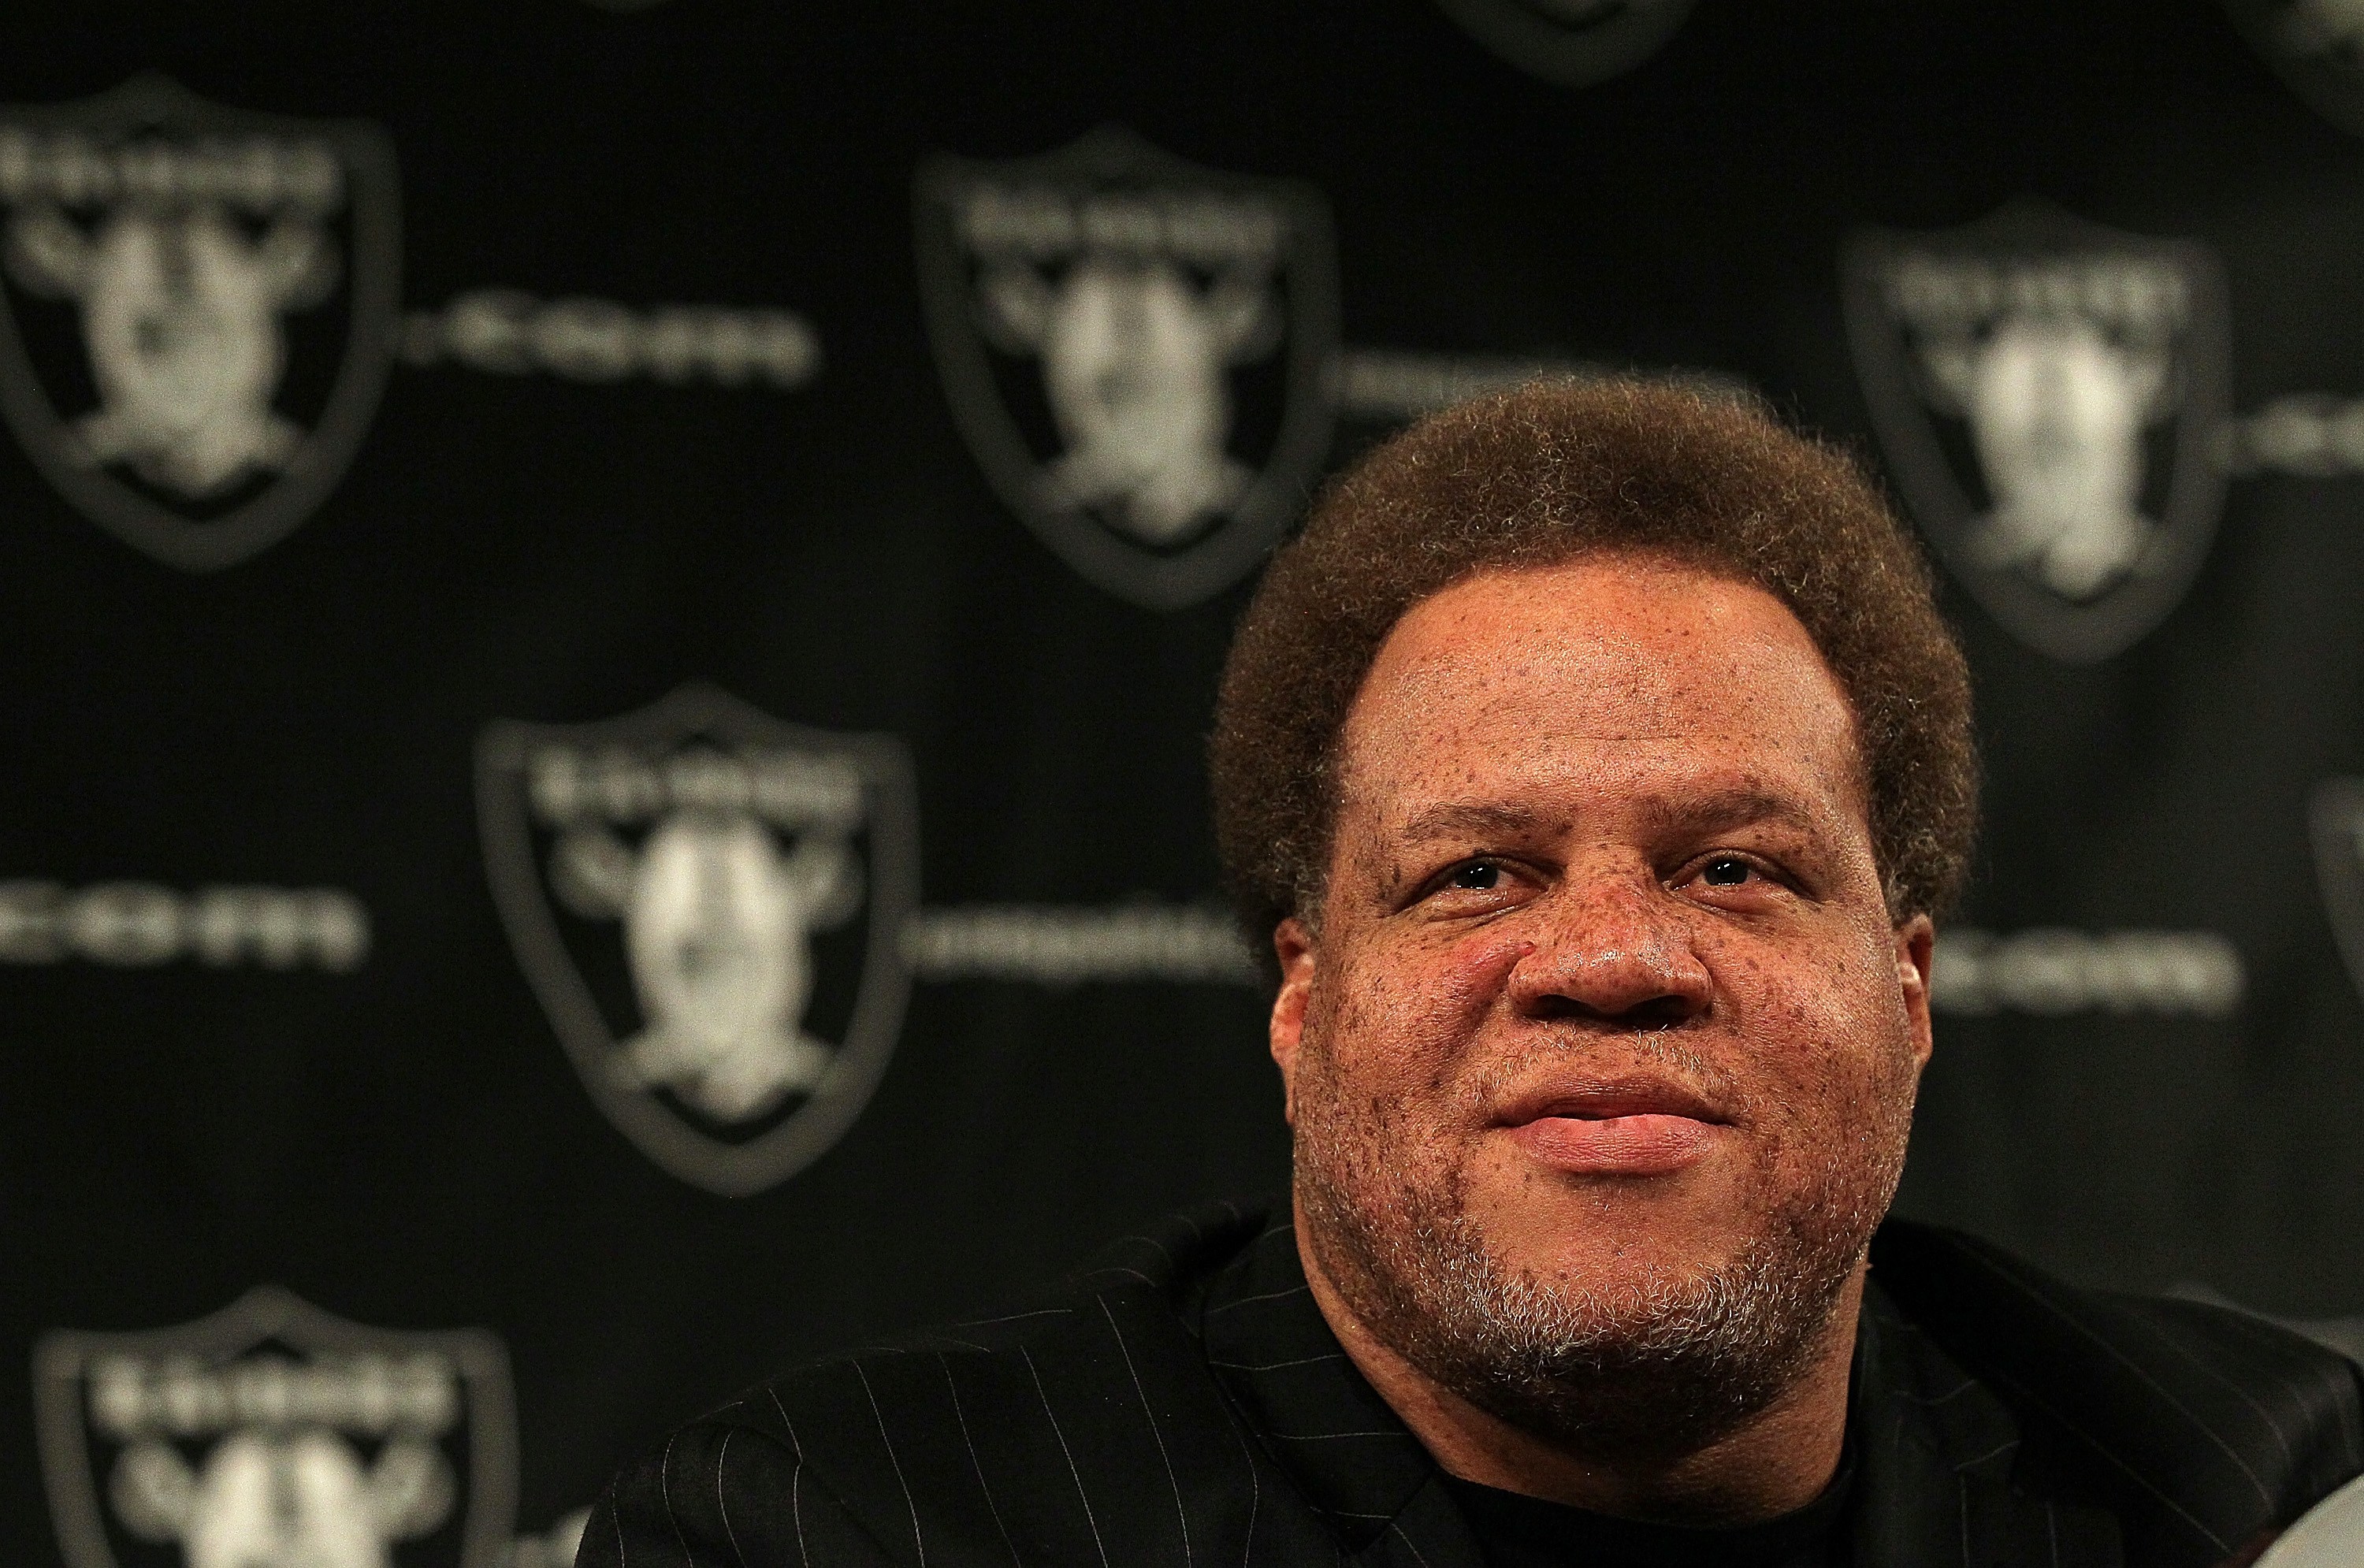 Raiders General Manager Reggie McKenzie looks on during a press conference.